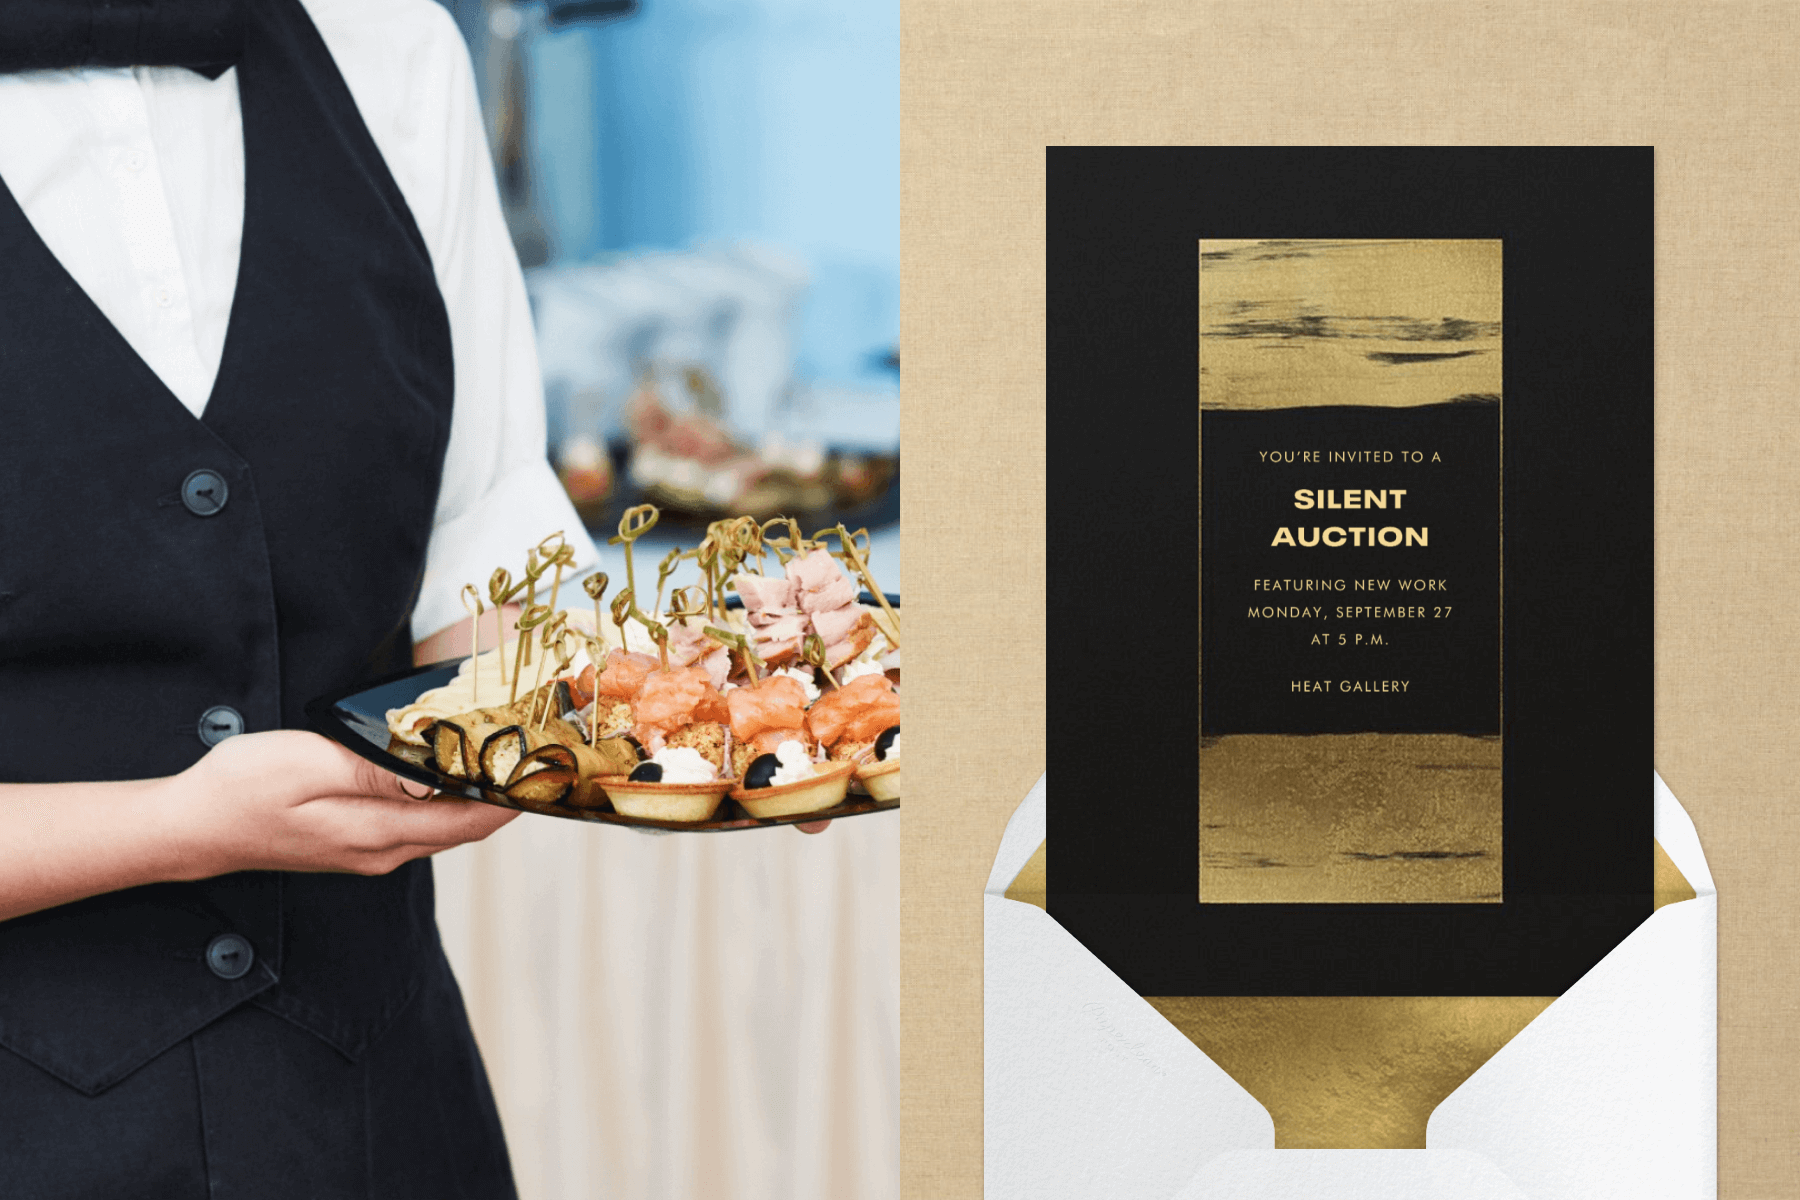 Left: A waiter carries passed hors d'oeuvres on a tray. Right: A black invitation for a silent auction with gold brushstrokes in the center.